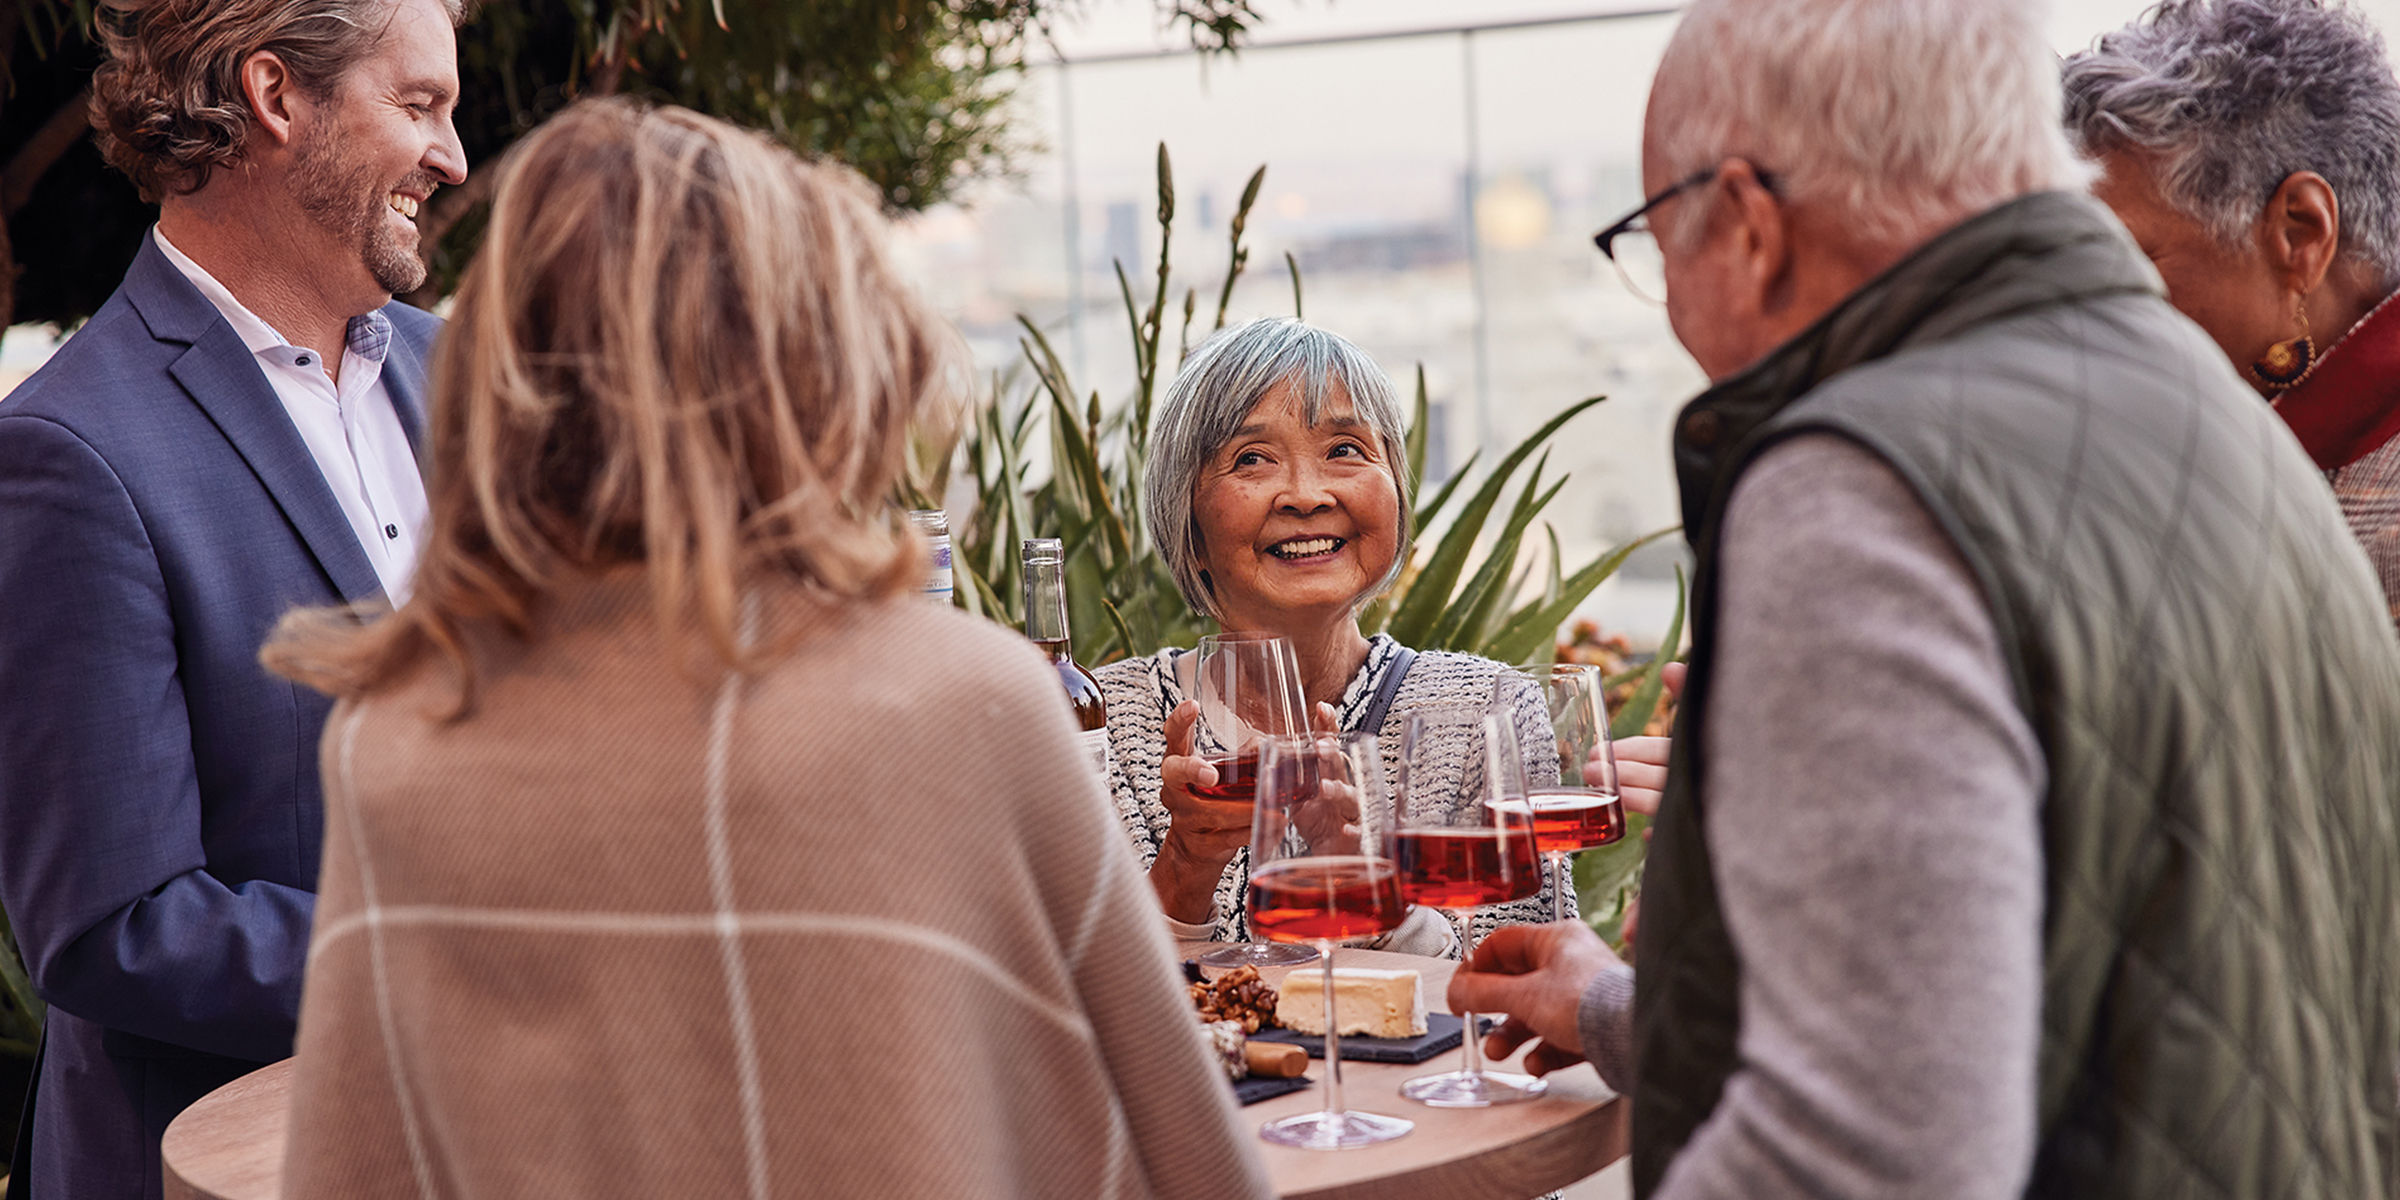 Older woman and her family celebrate outside around a table with red wine